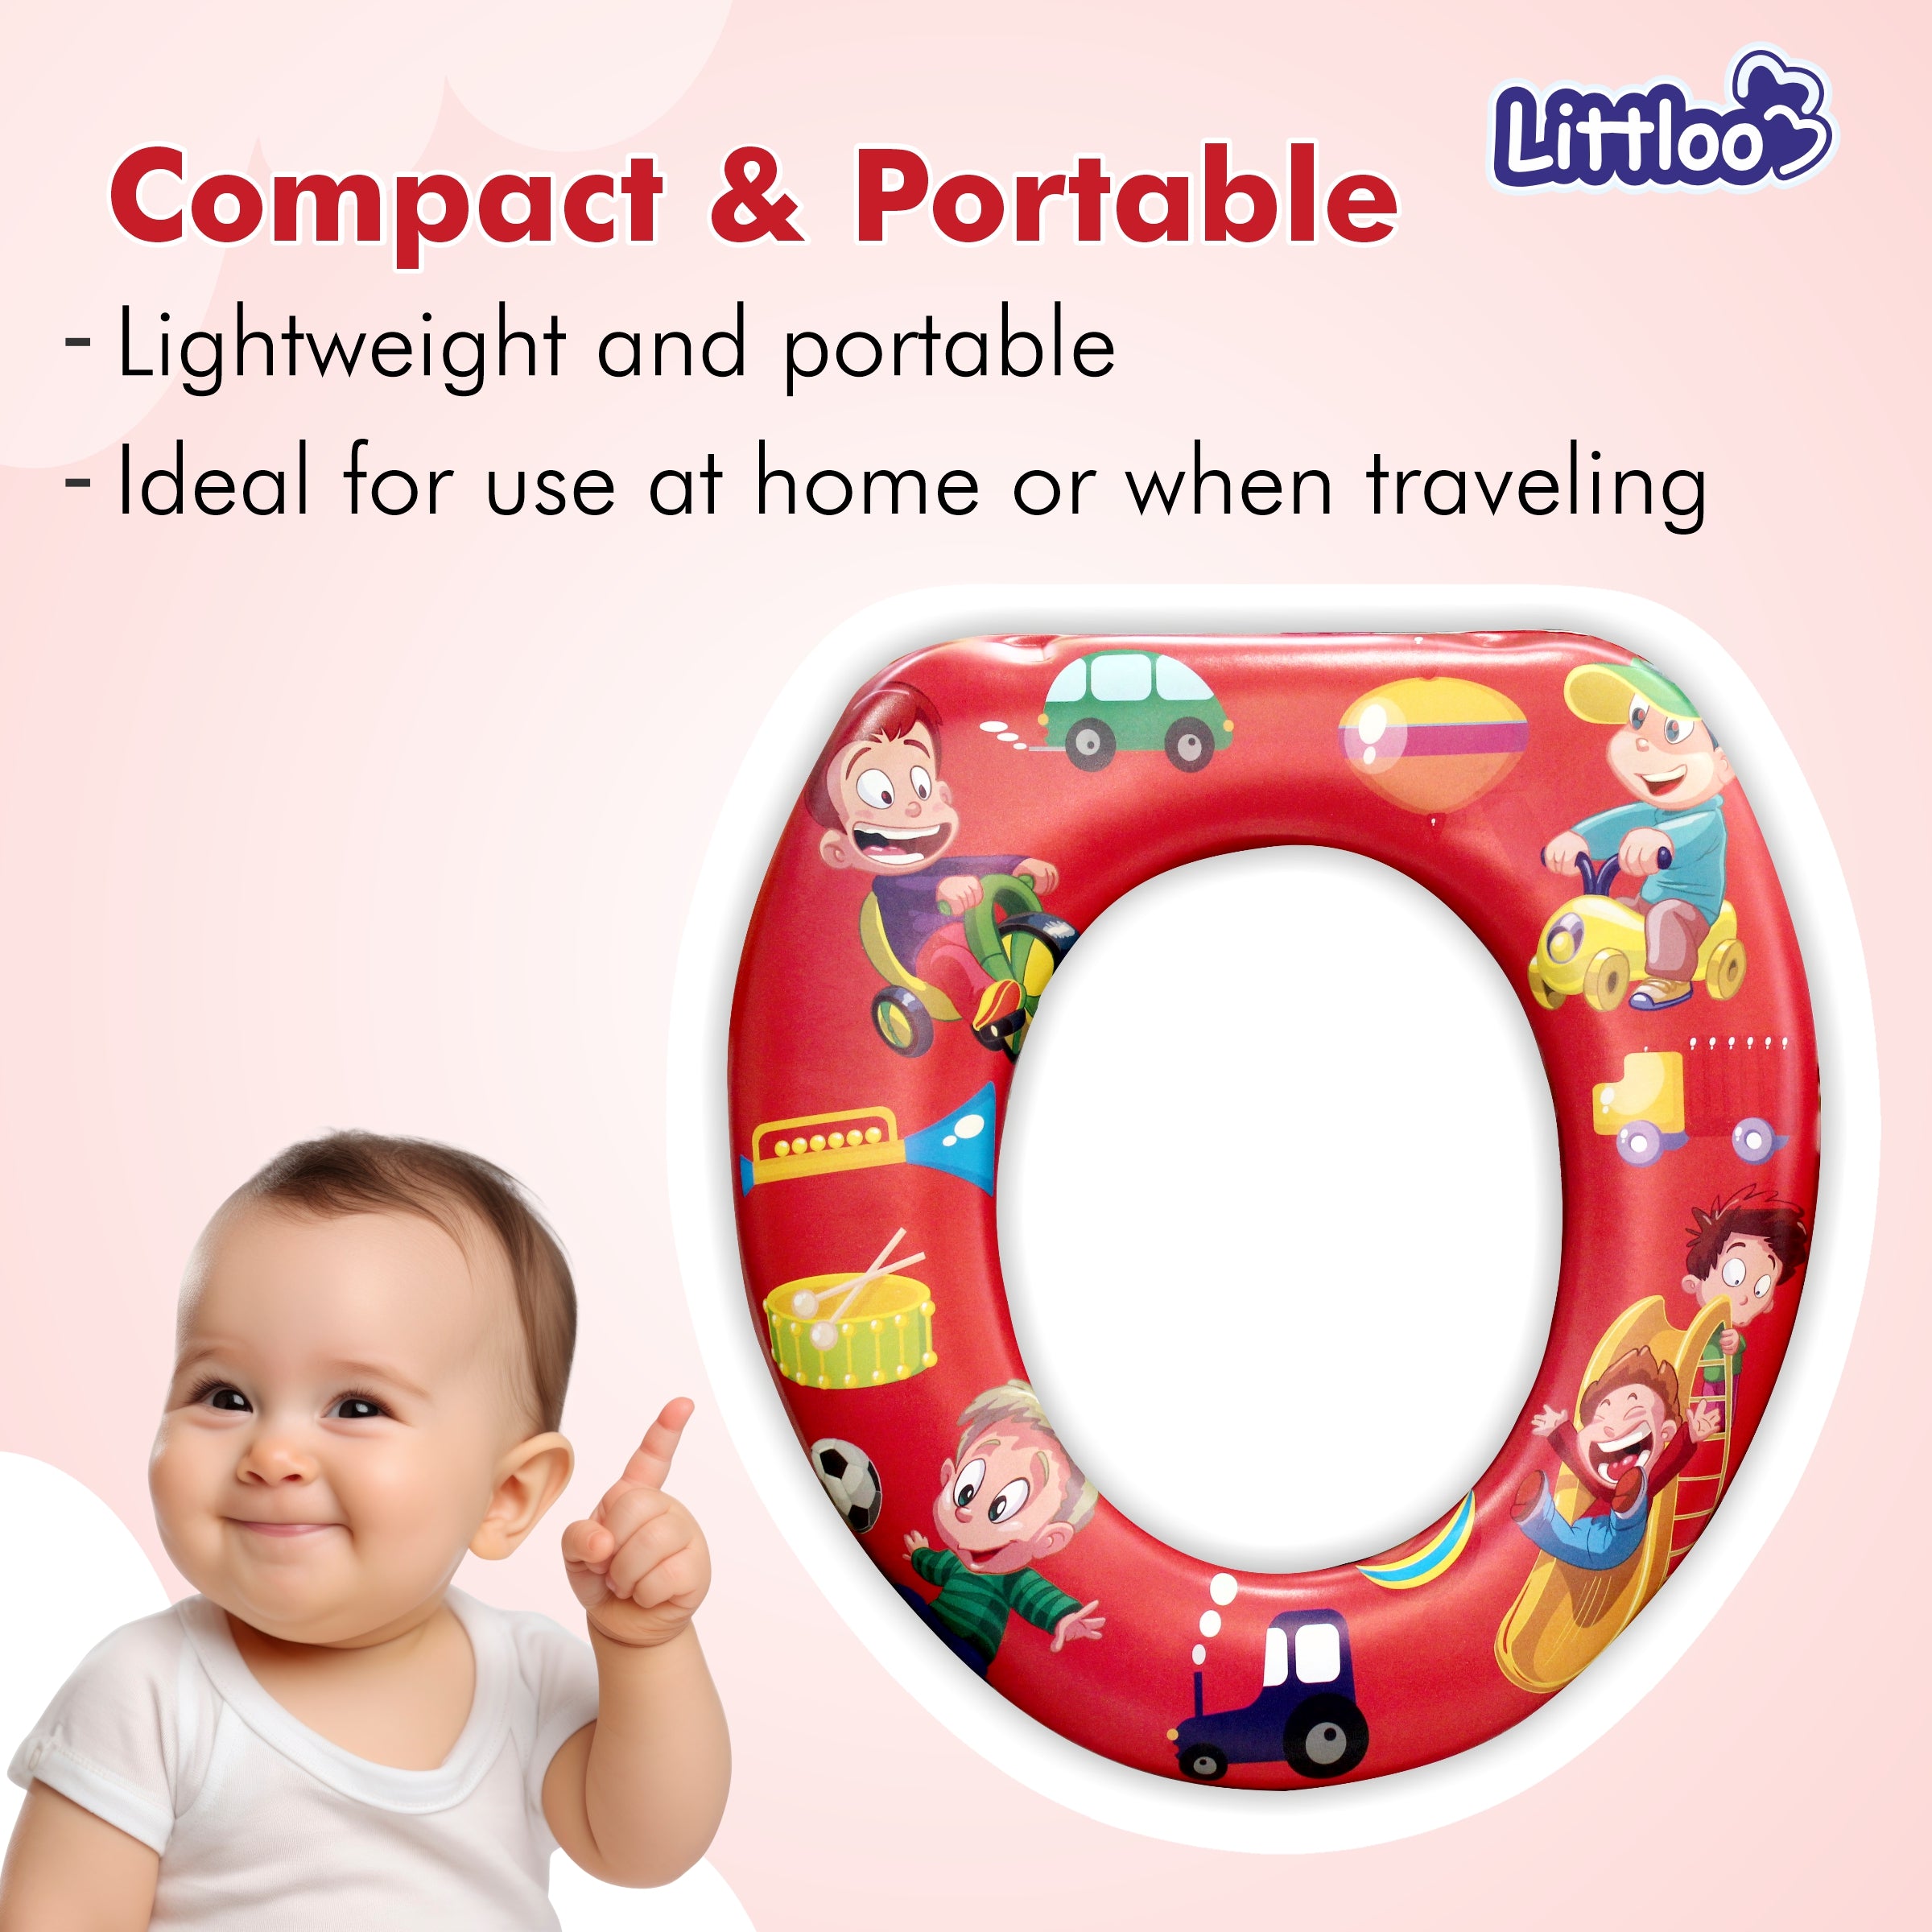 Littloo Baby Potty Seat - Comfort and Confidence for Your Toddler's Potty Training Journey - Red - Littloo